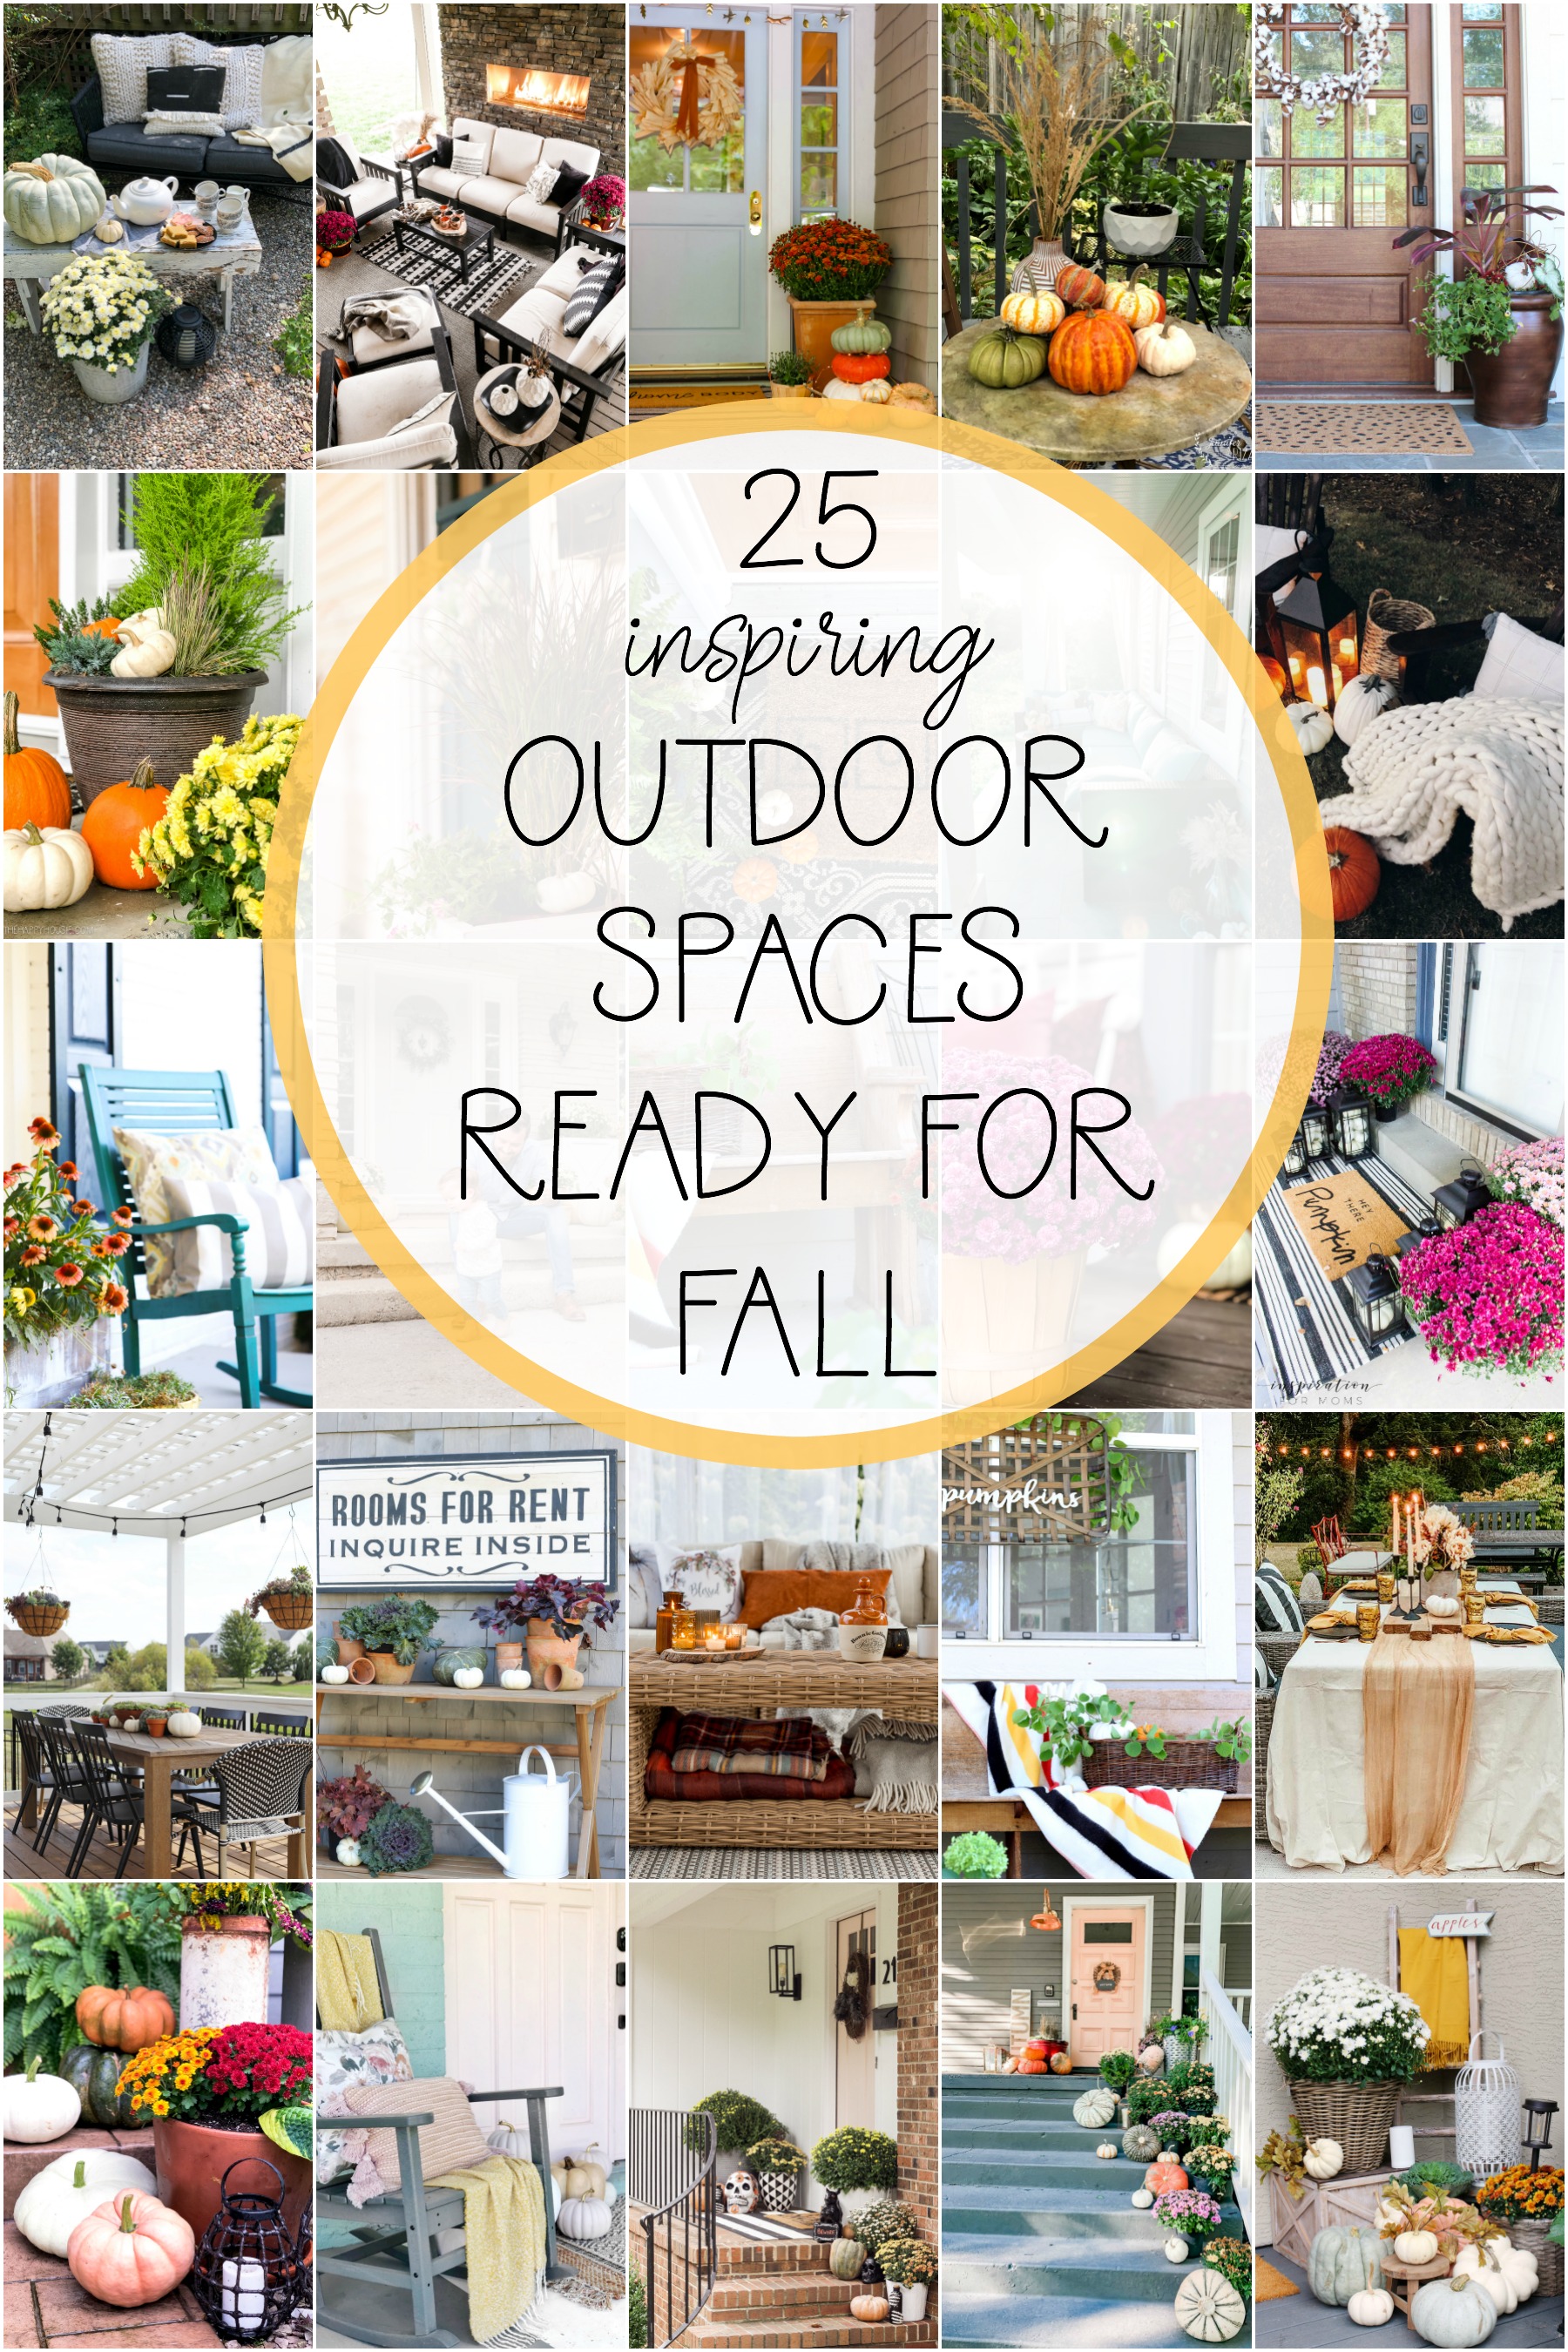 25 Inspiring Outdoor Spaces Ready For Fall poster.